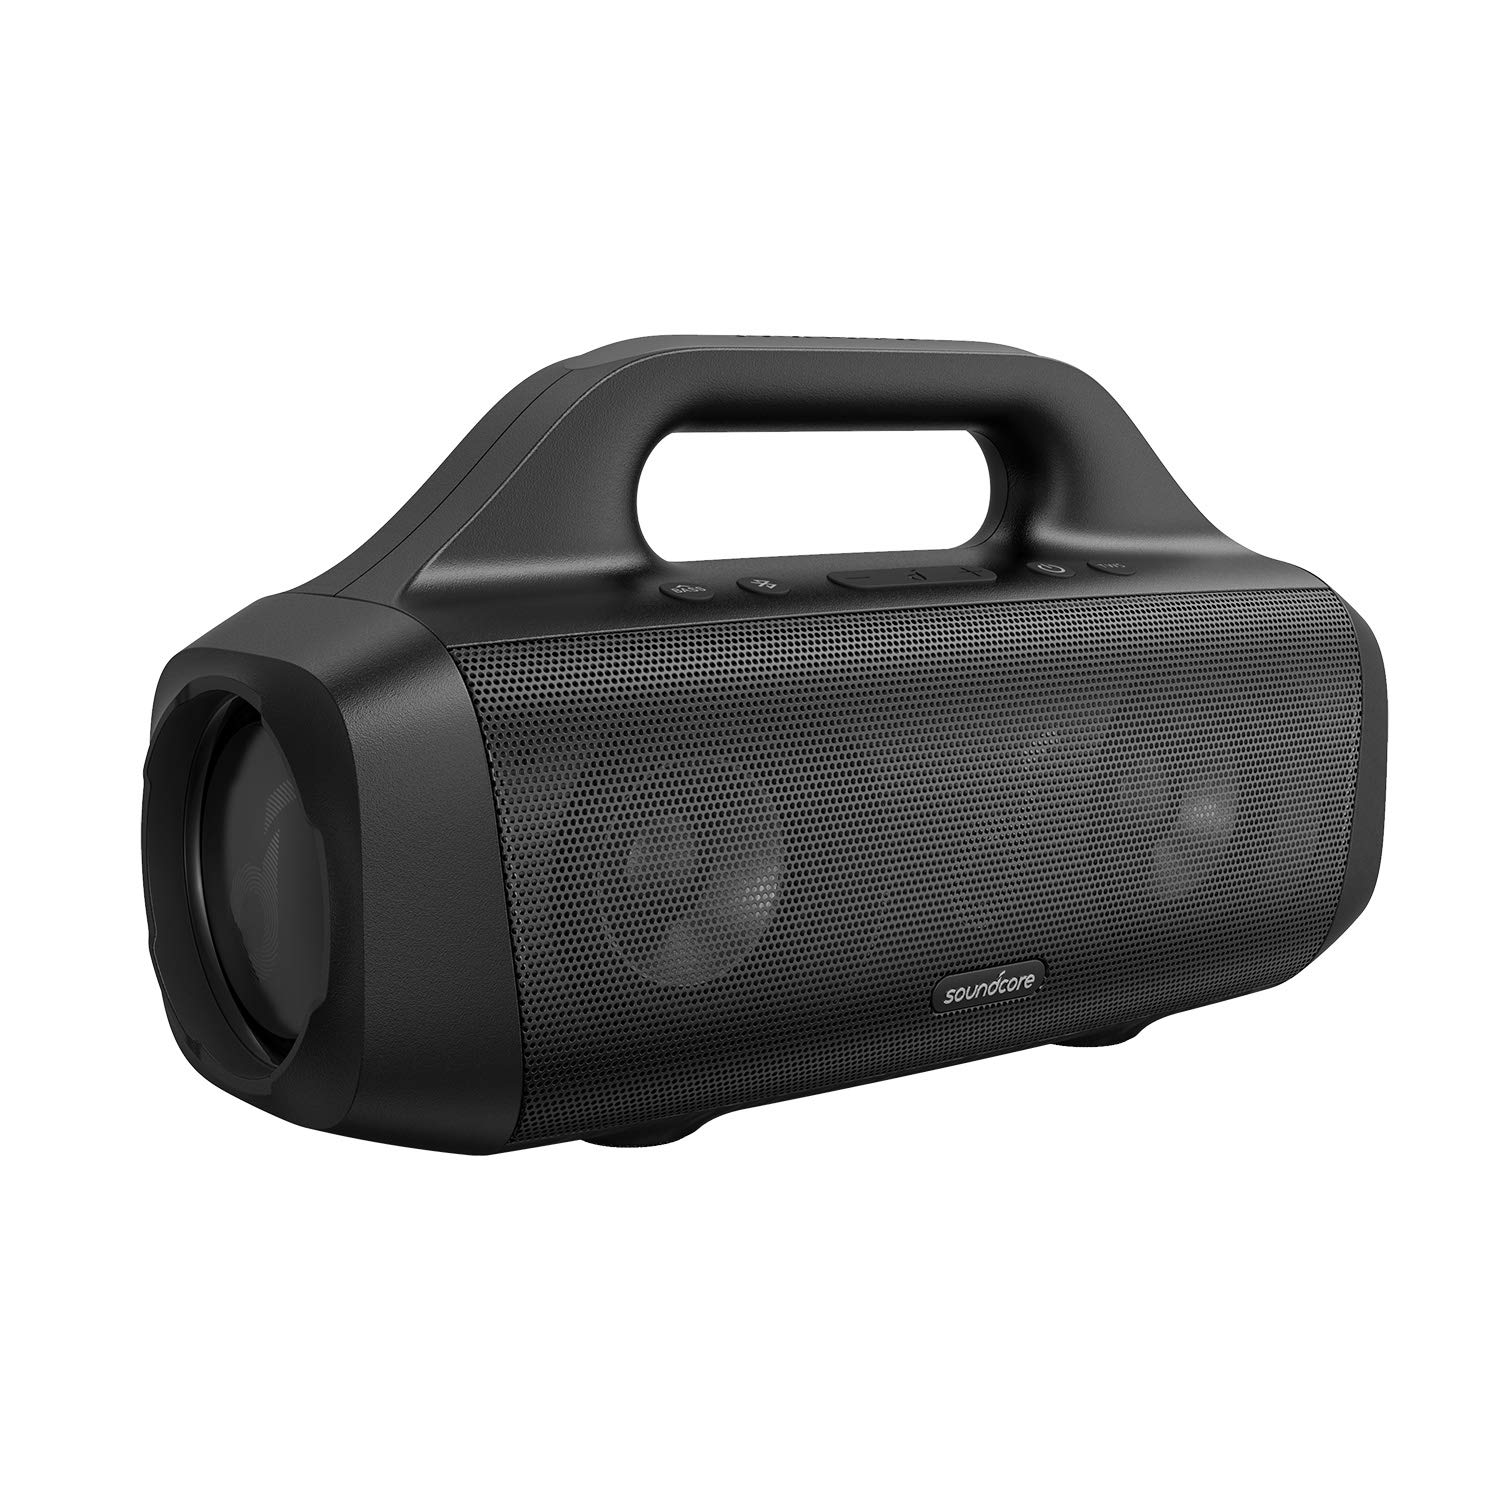 Soundcore Motion Boom Outdoor Speaker with Titanium Drivers, BassUp Technology, IPX7 Waterproof, 24H Playtime, App, Built-in Handle, Portable Bluetooth Speaker for Outdoors, Camping